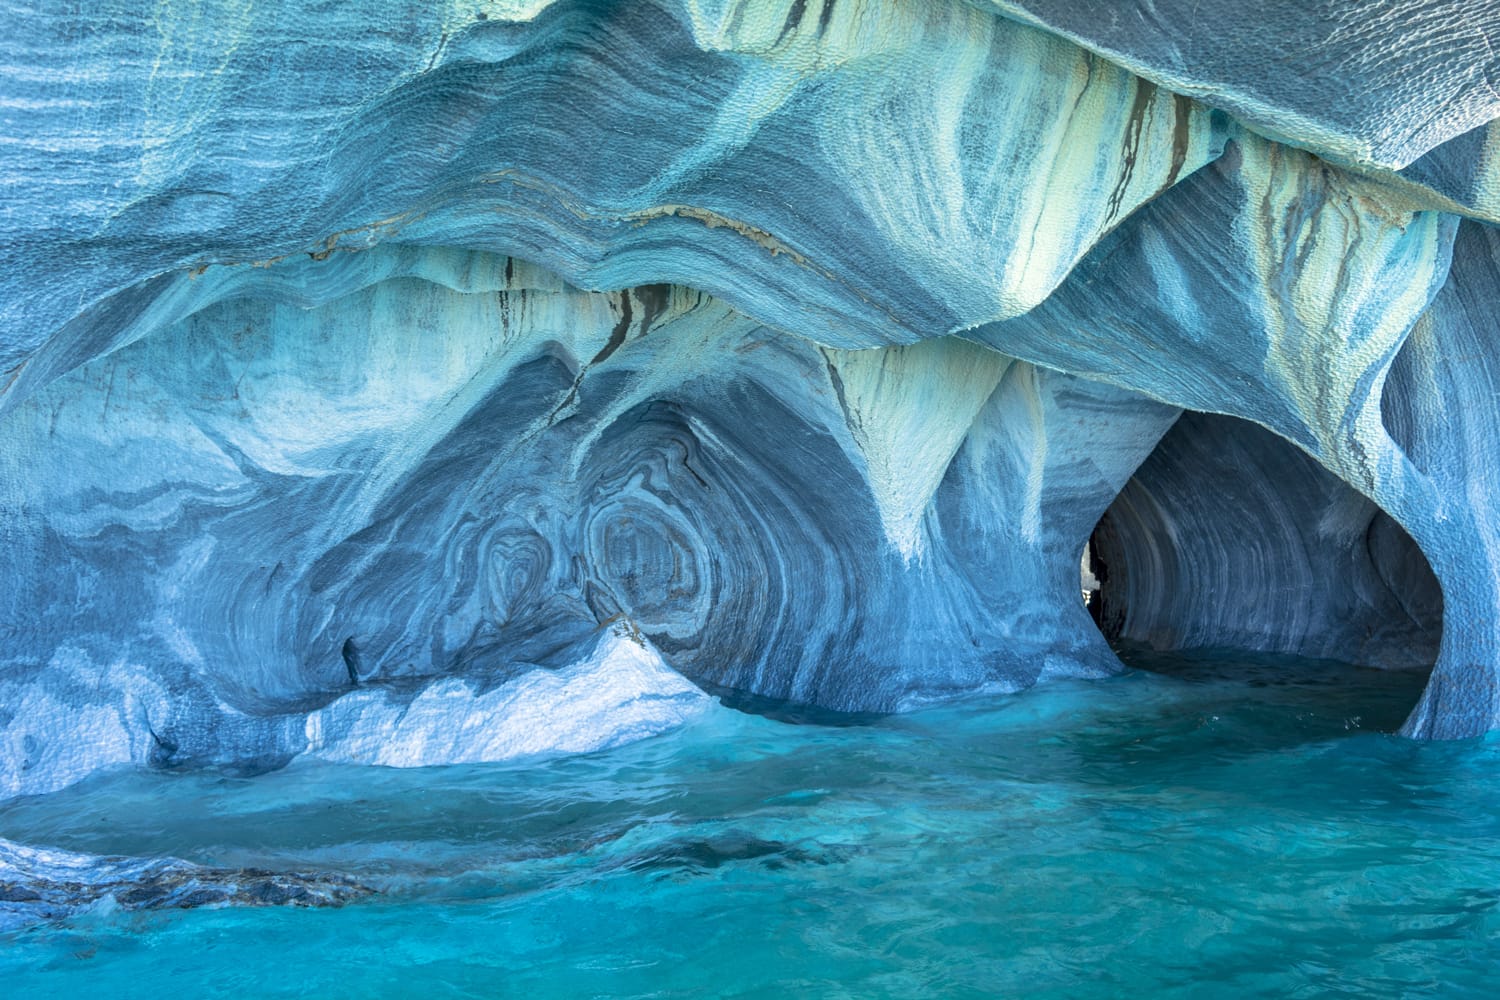 marble-caves-chile-shutterstock_502319518.jpg